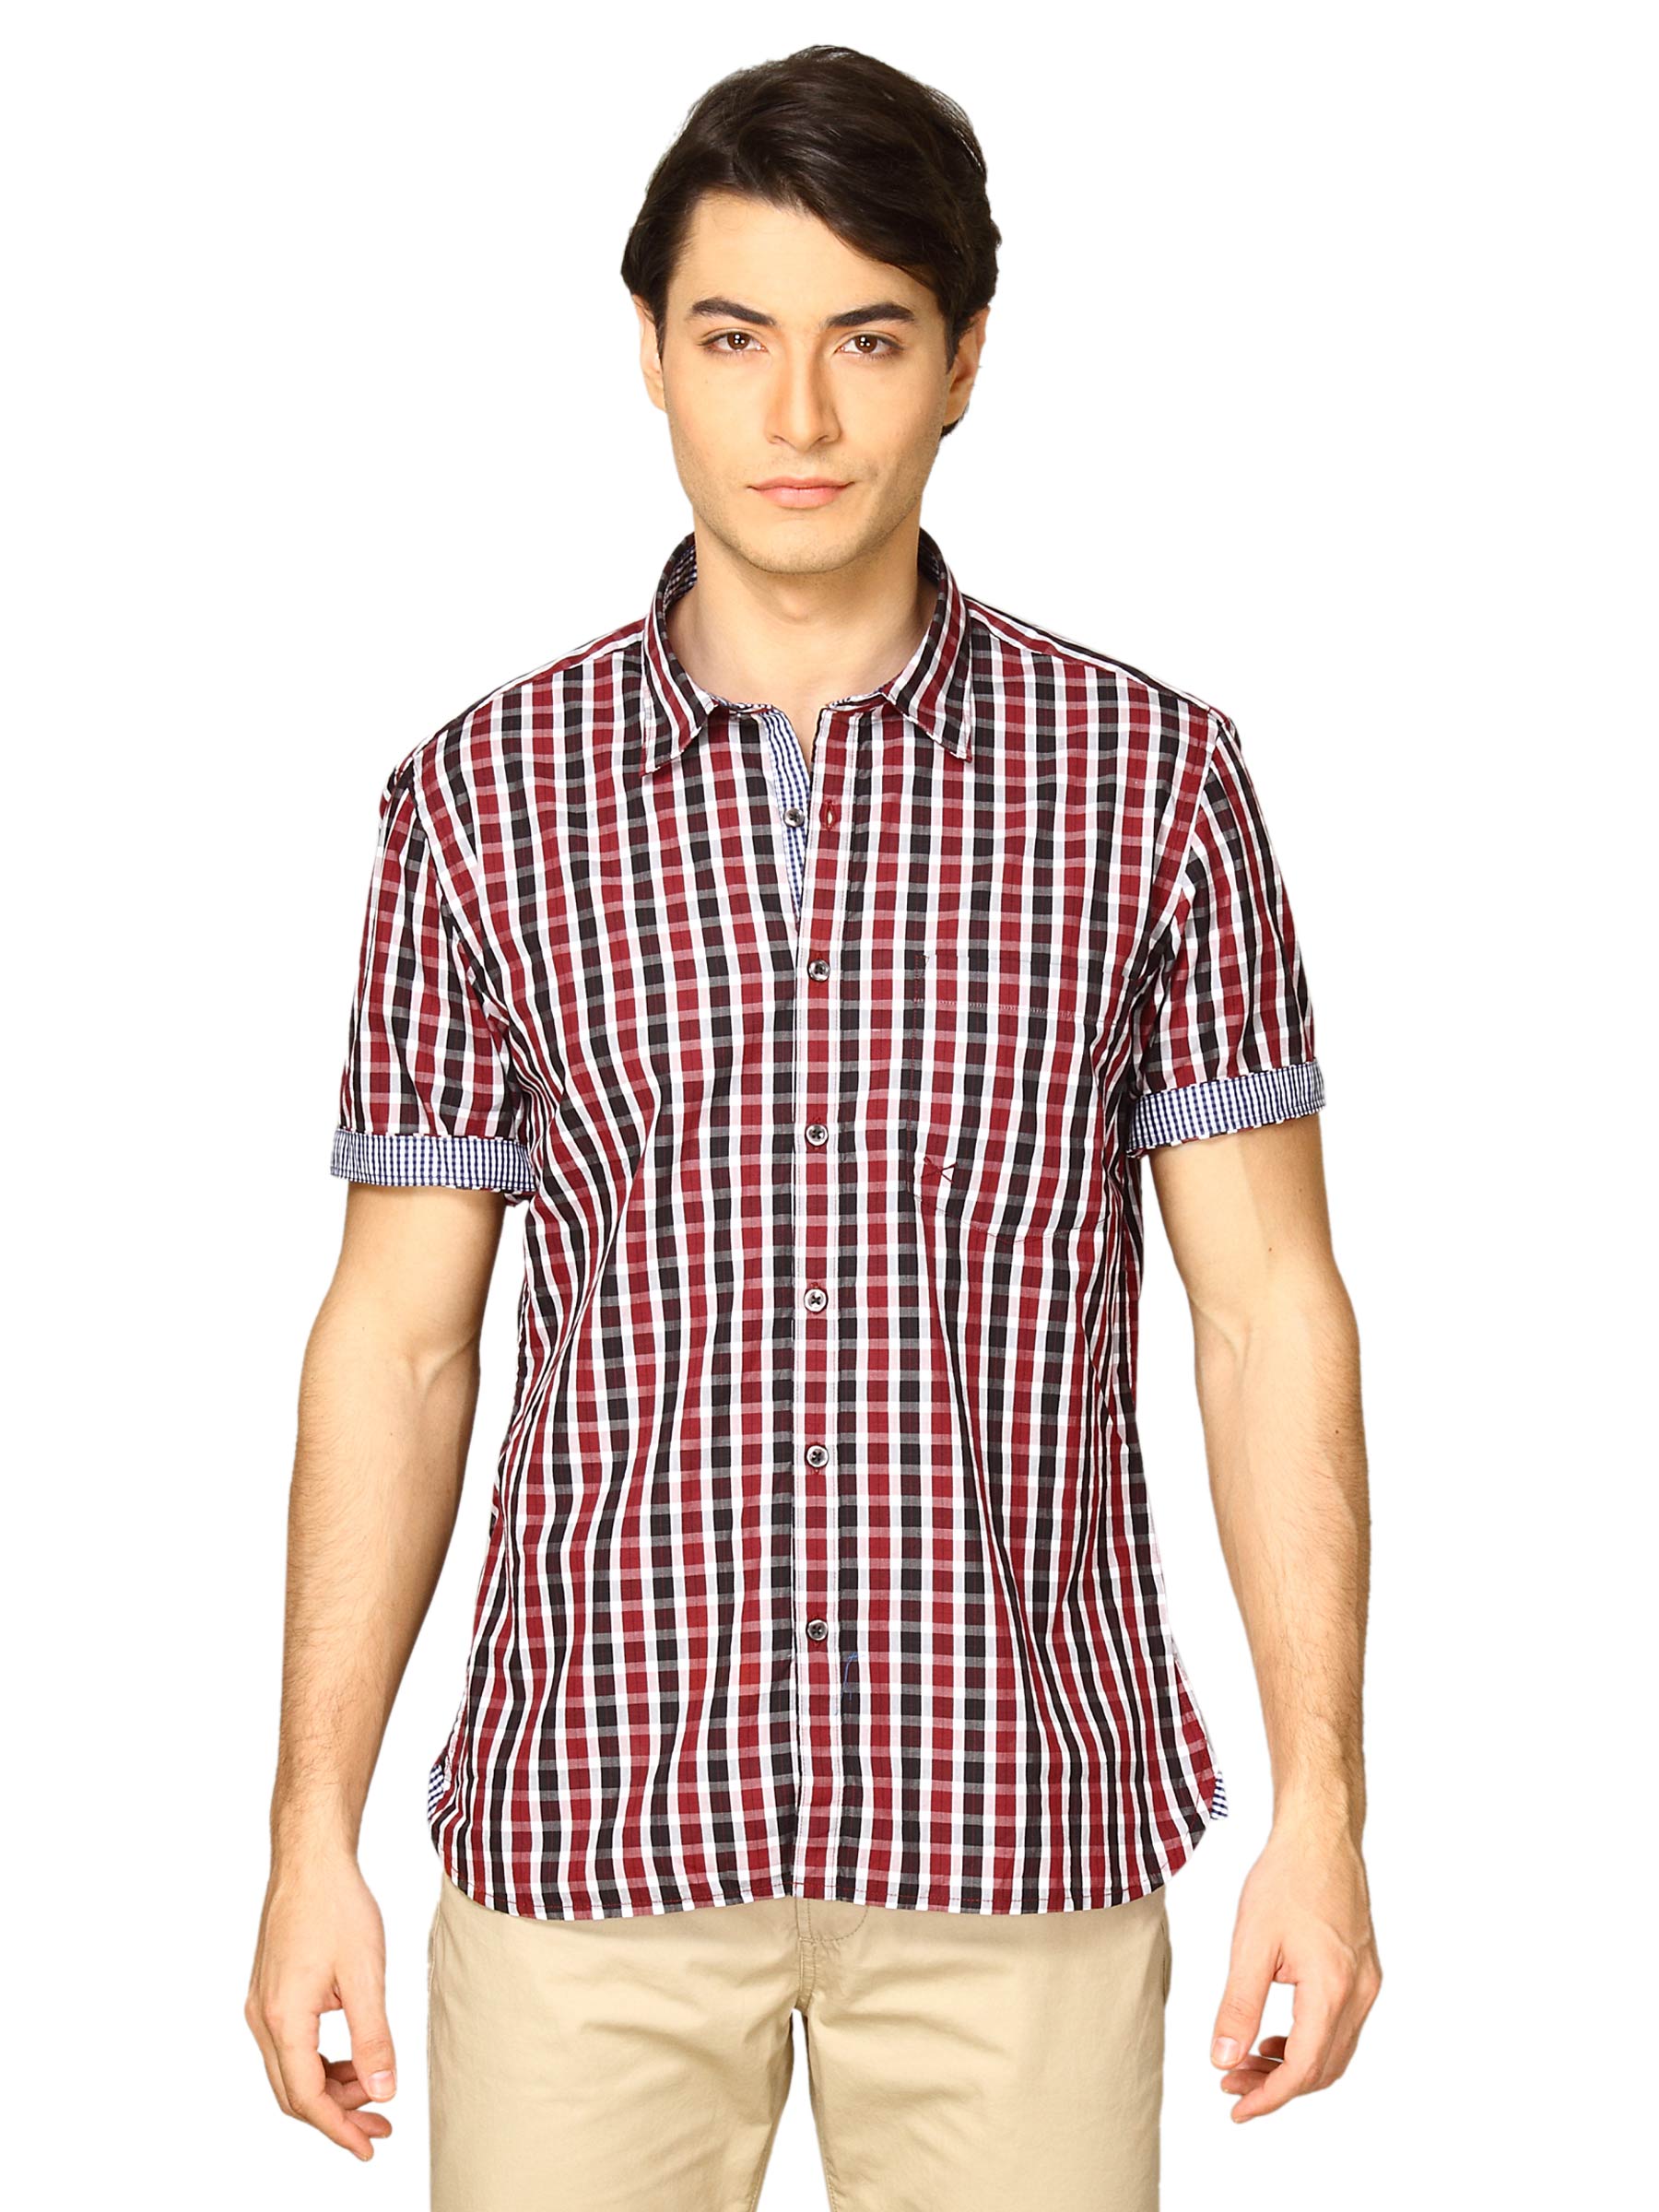 Scullers Men Scul Red White Shirt